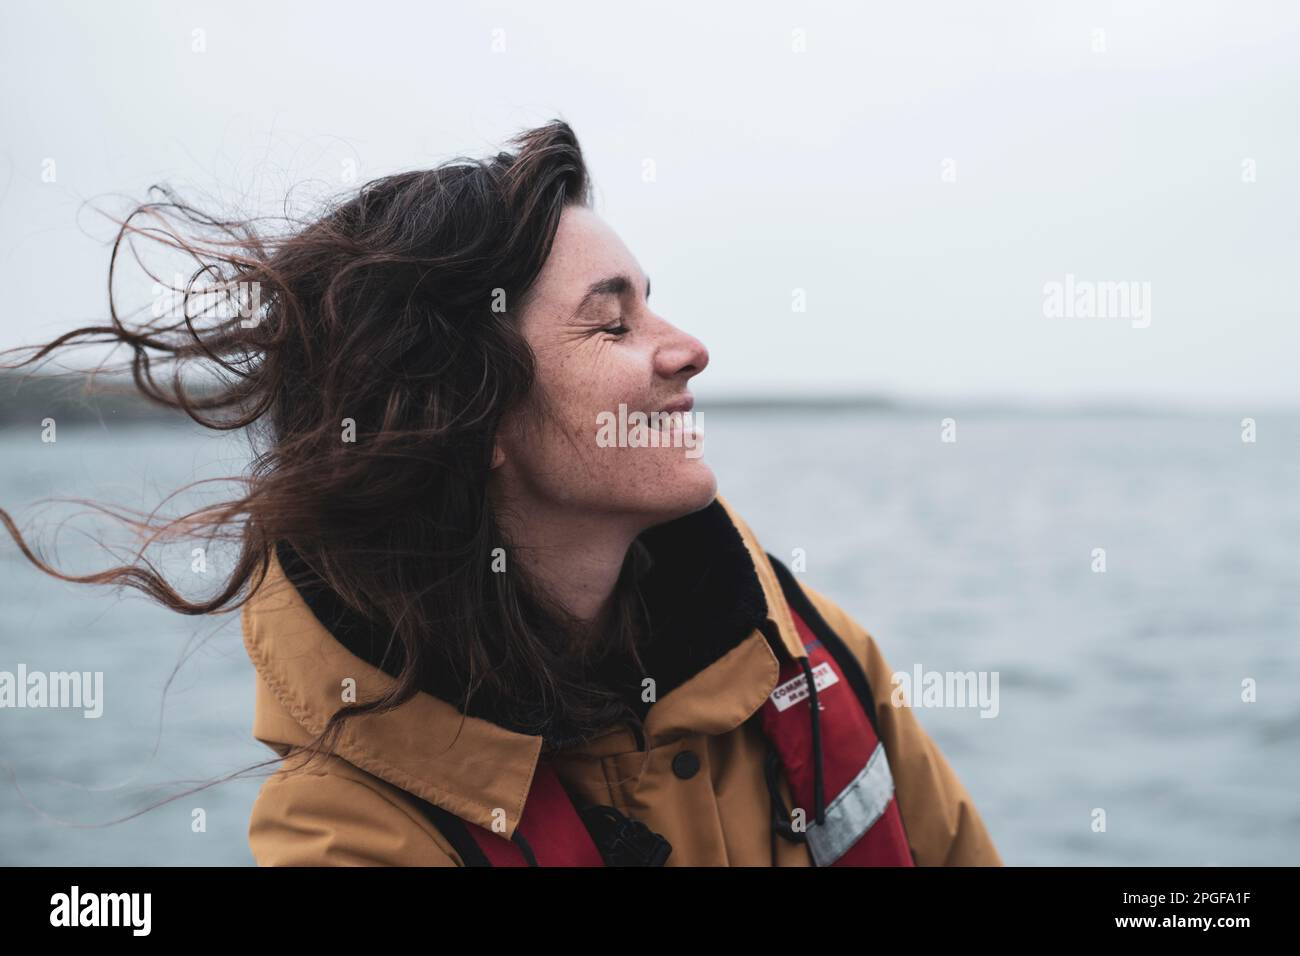 Profile of happy woman with freckles smiling on boat in Scotland Stock Photo